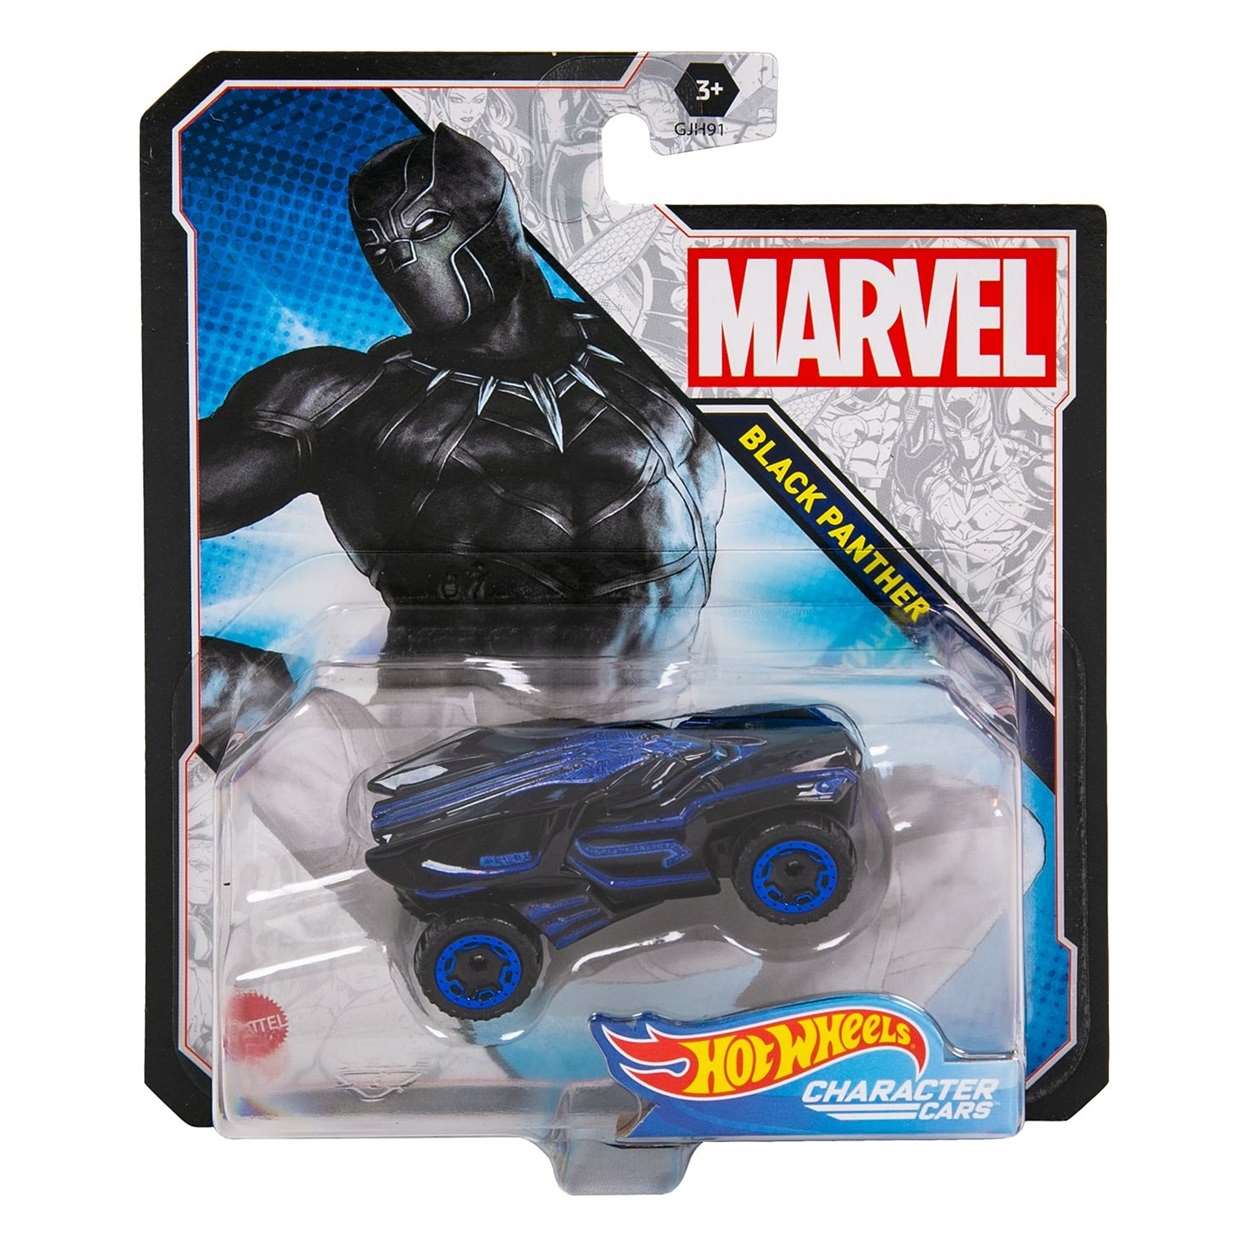 Black Panther 1/64 Hot Wheels Marvel Character Cars